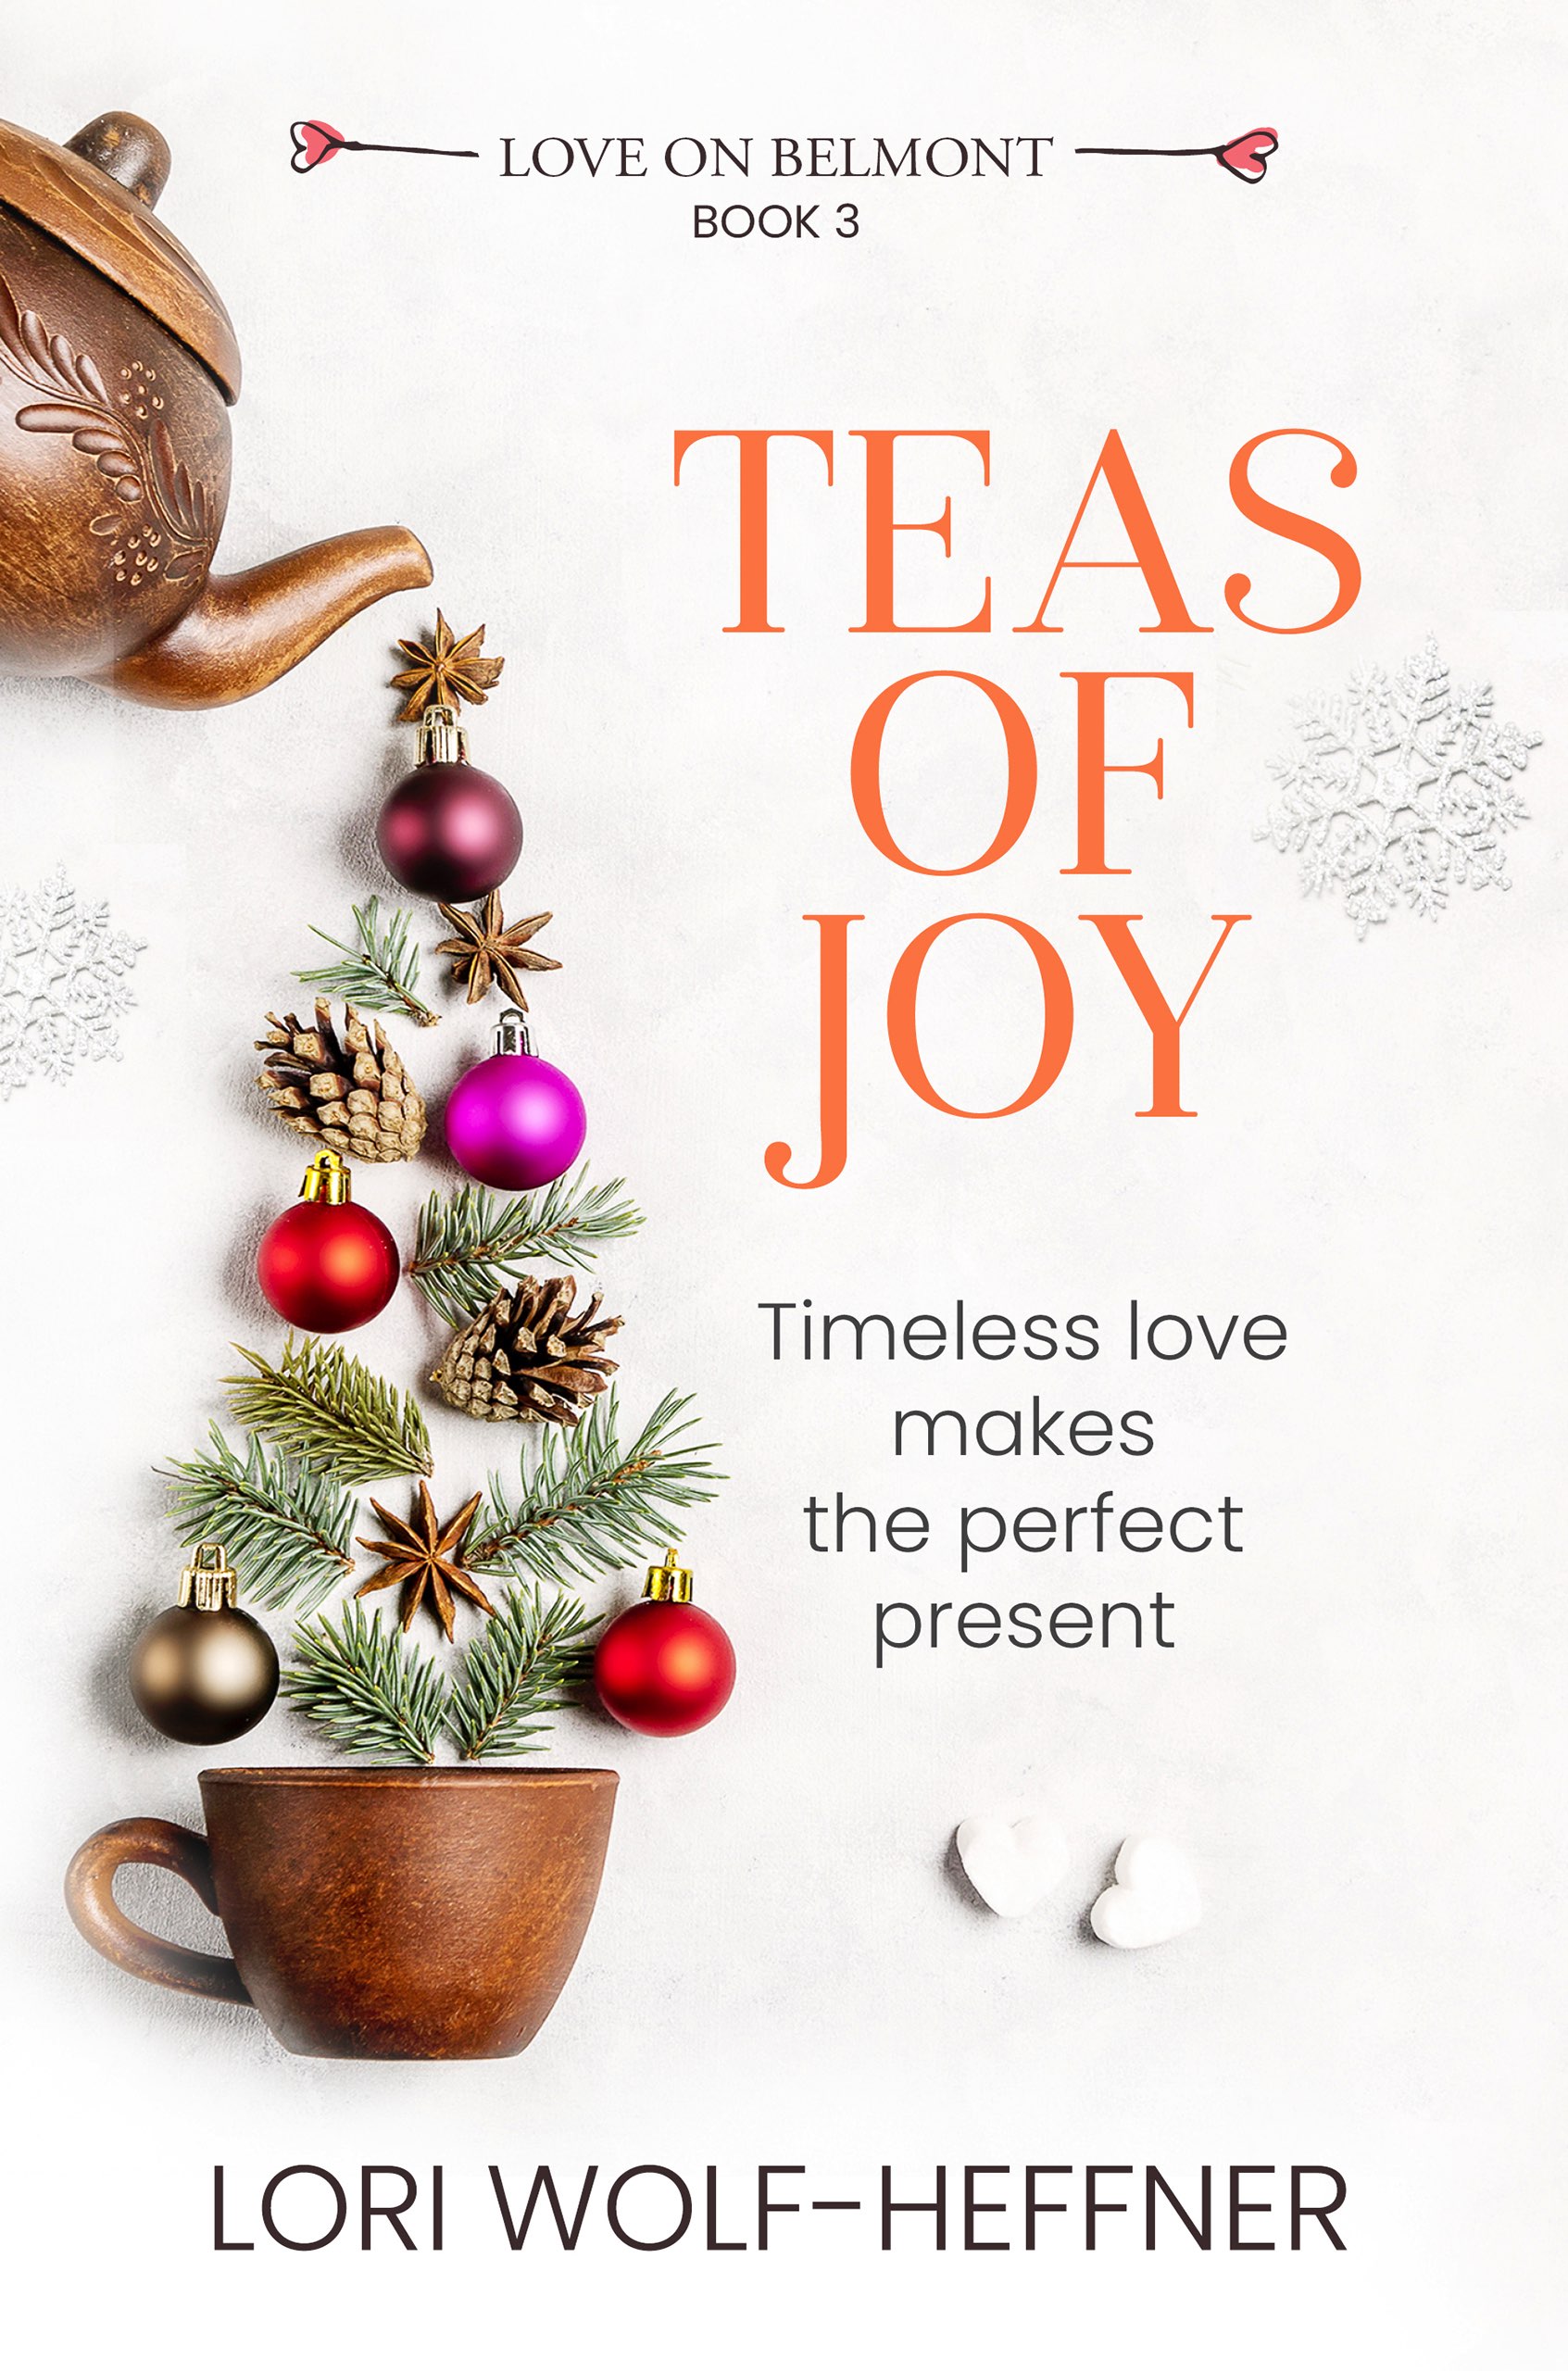 Cover for Love on Belmont 3: Teas of Joy. Timeless love makes the perfect present.